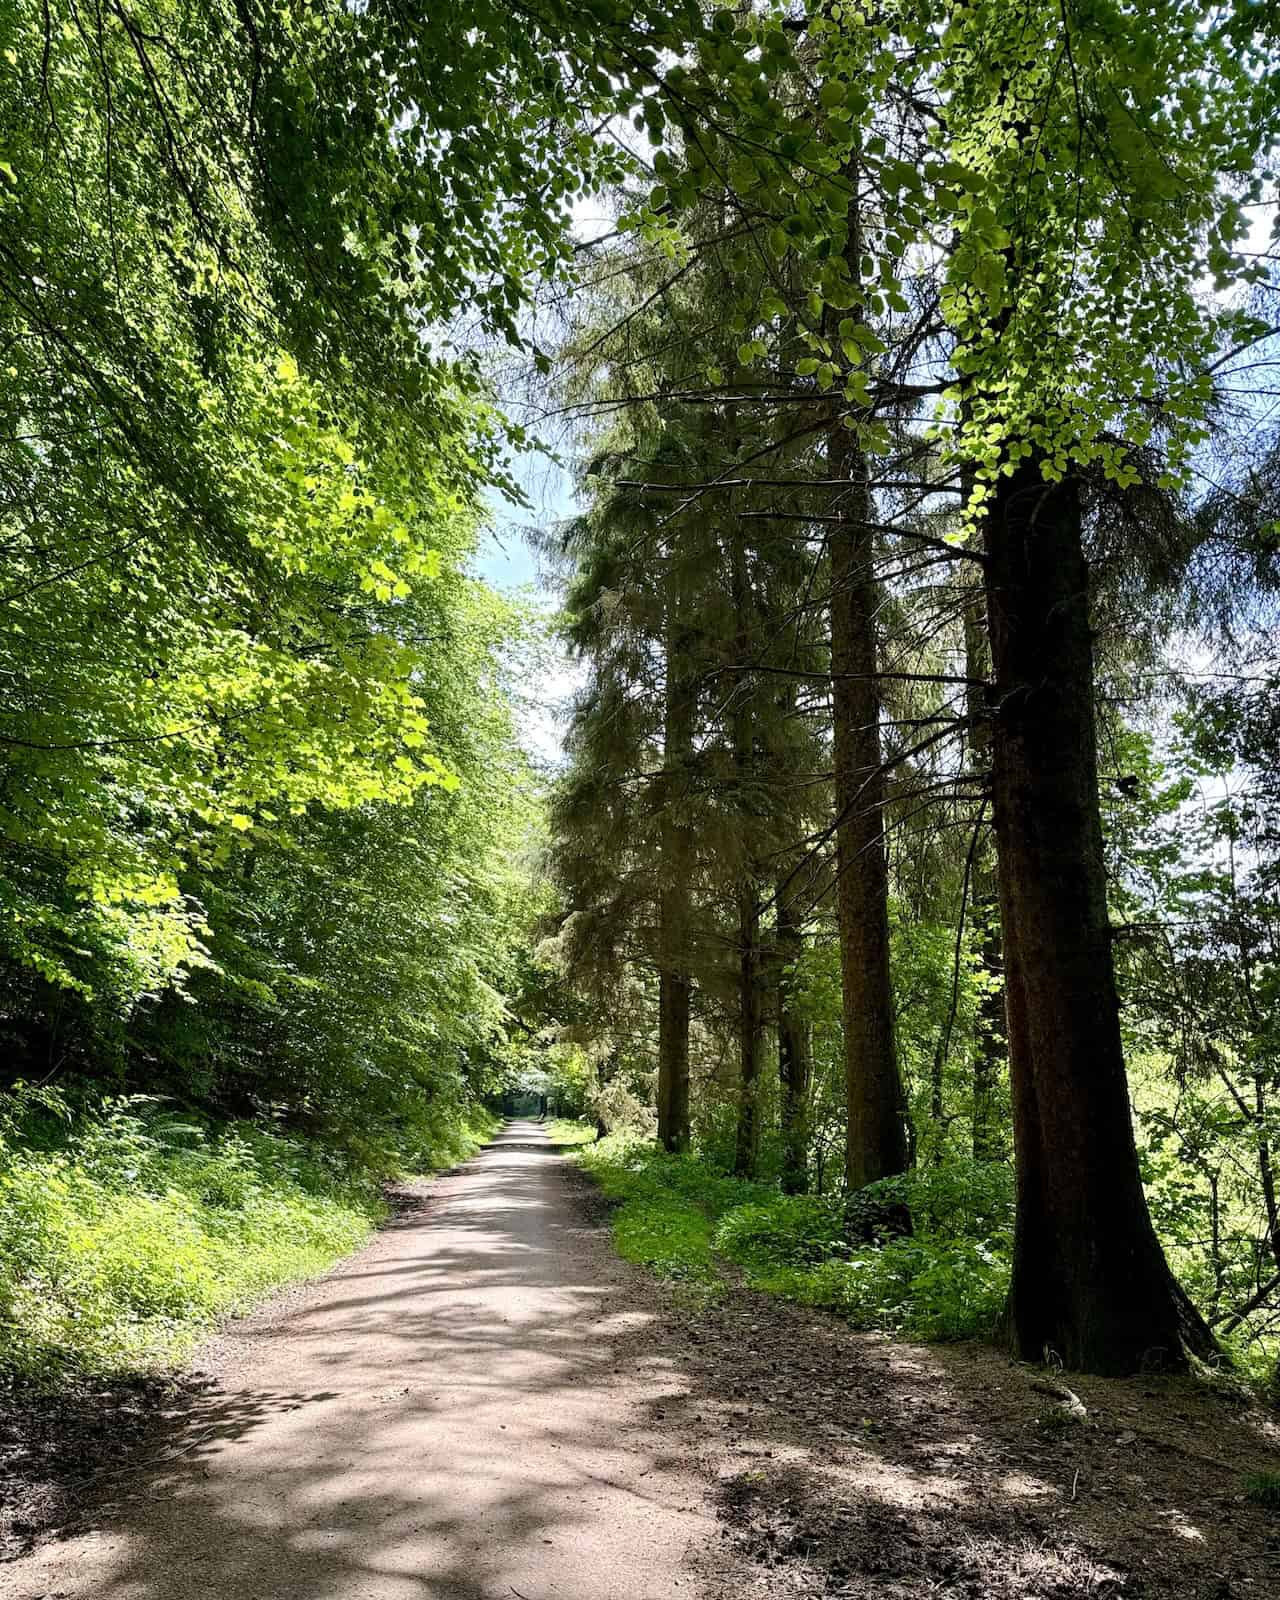 The forestry track heading south through Dalby Forest is beautifully lit by the sun, making our walk even more enjoyable.